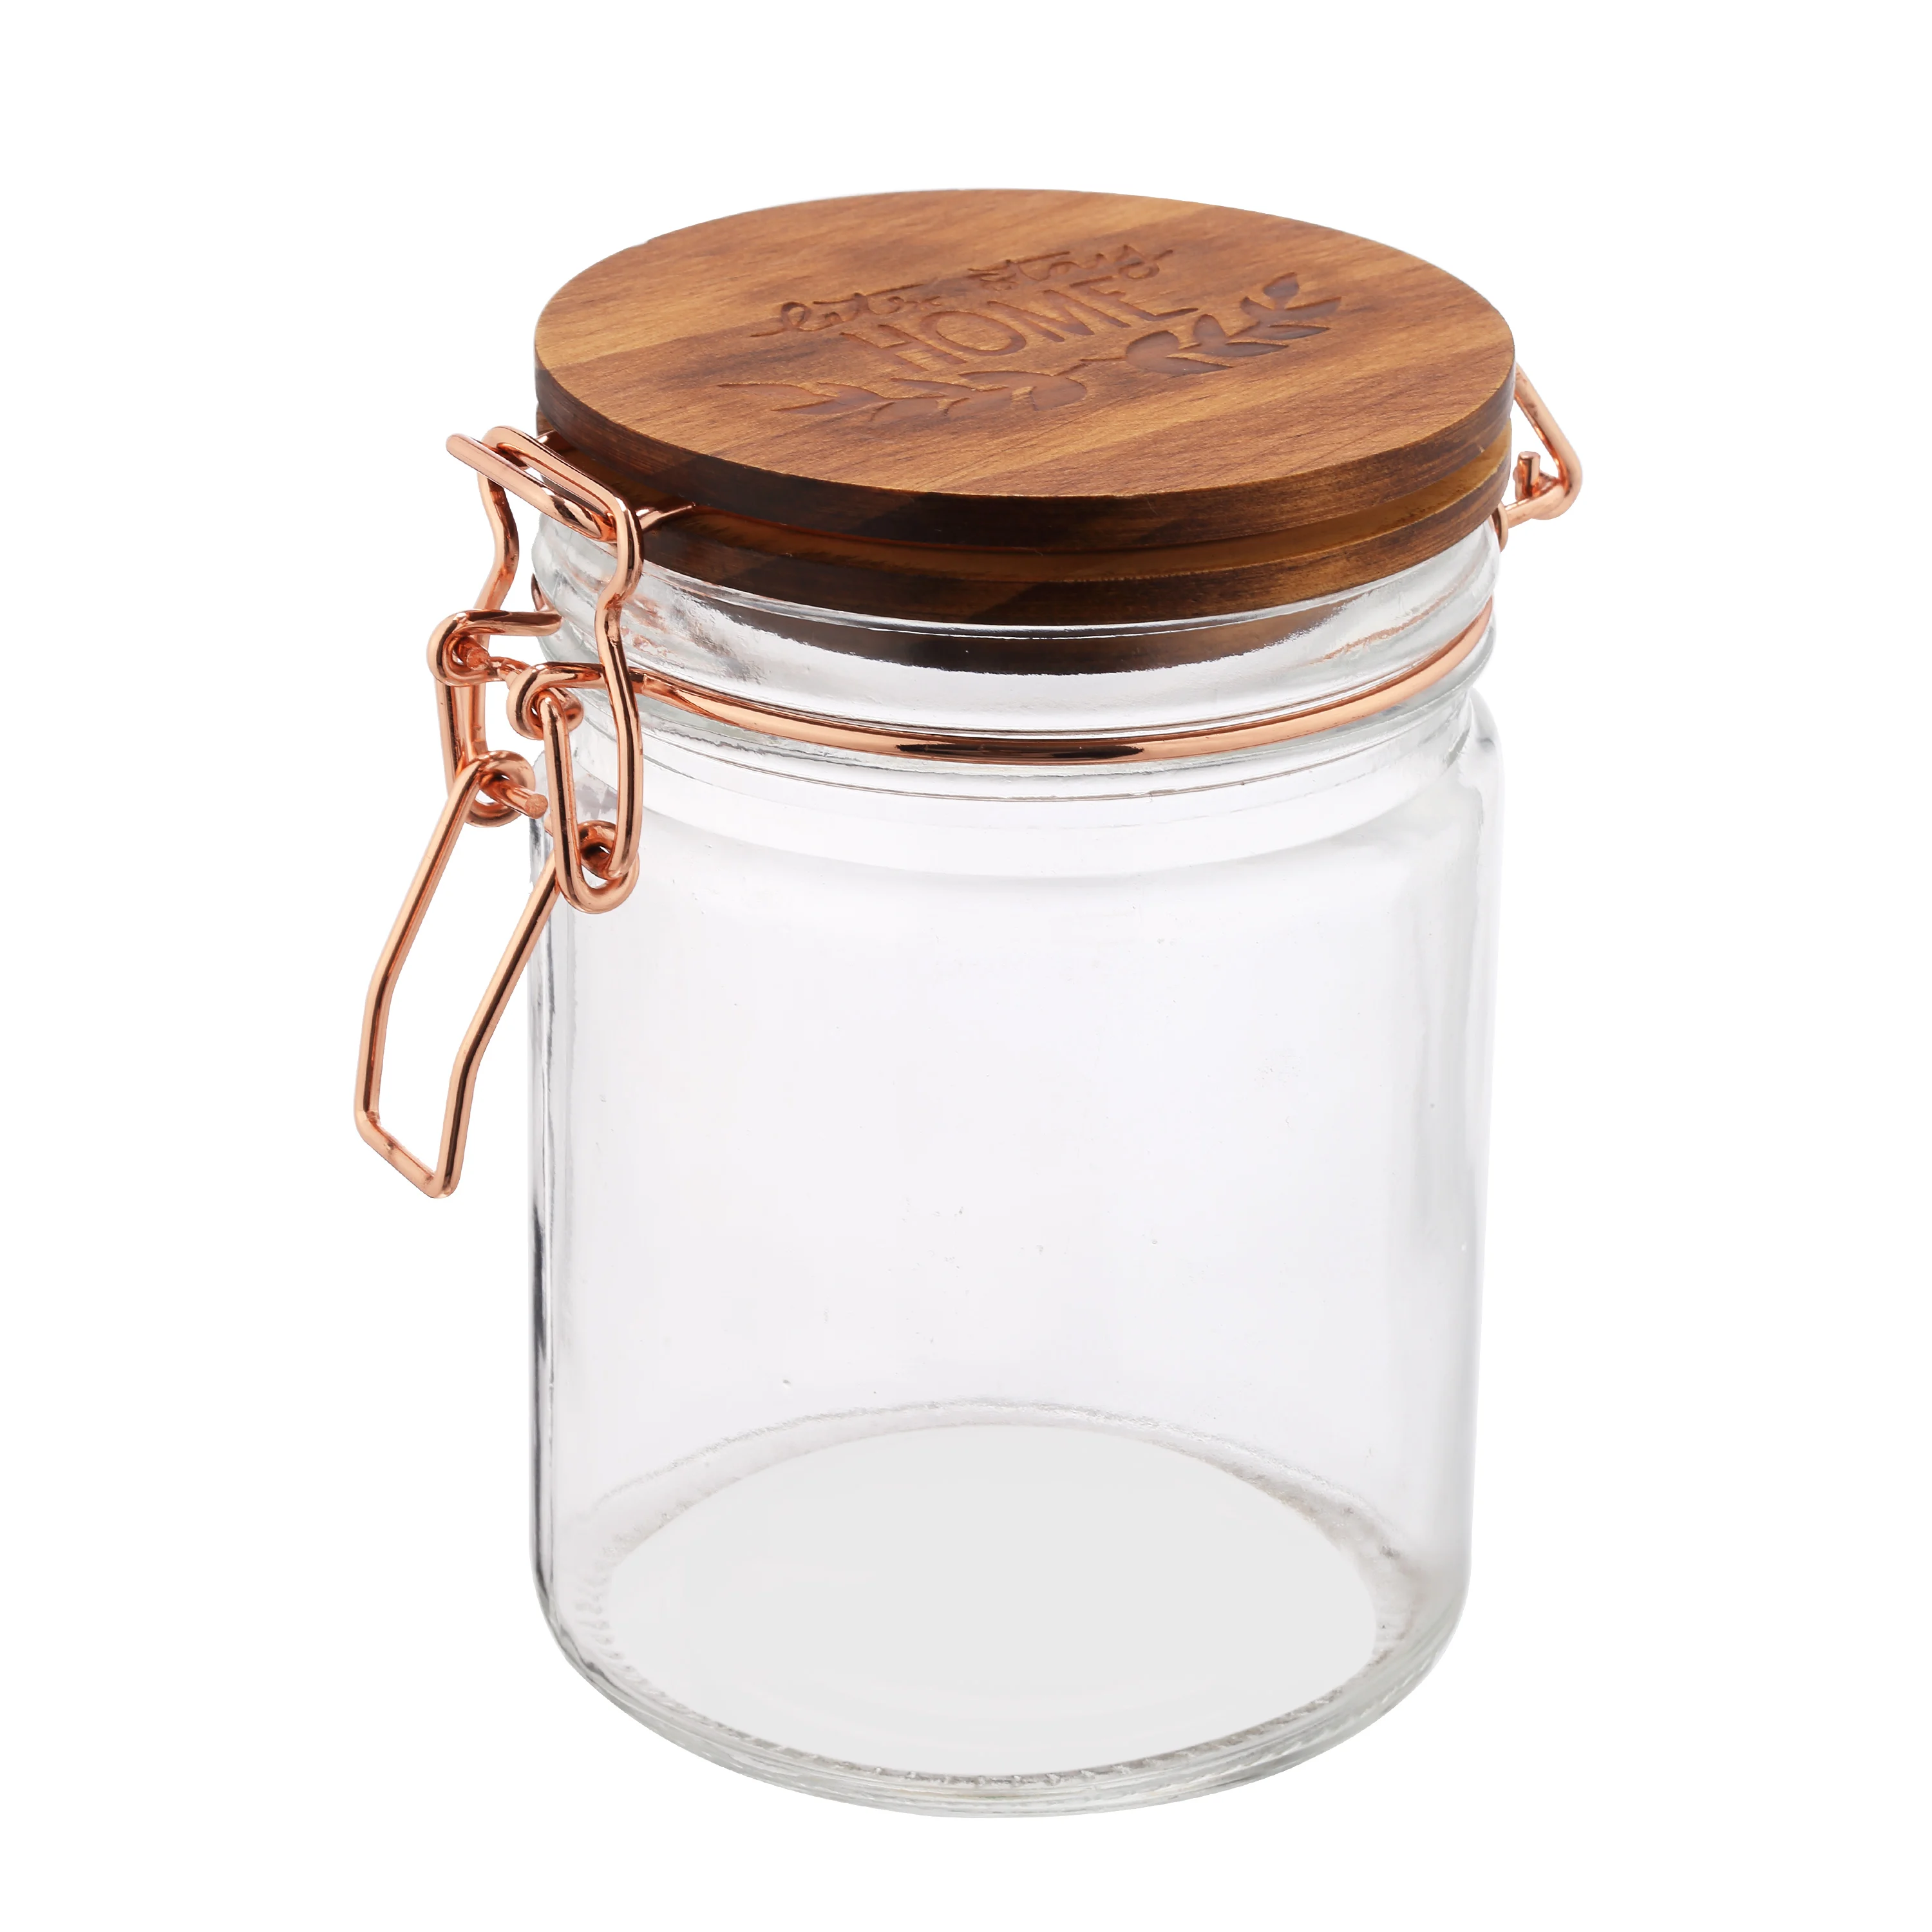 

Custom kitchen glass gold wire cliptop container nut food storage airtight seal lock lid jar with wood clamp lid, Customized color